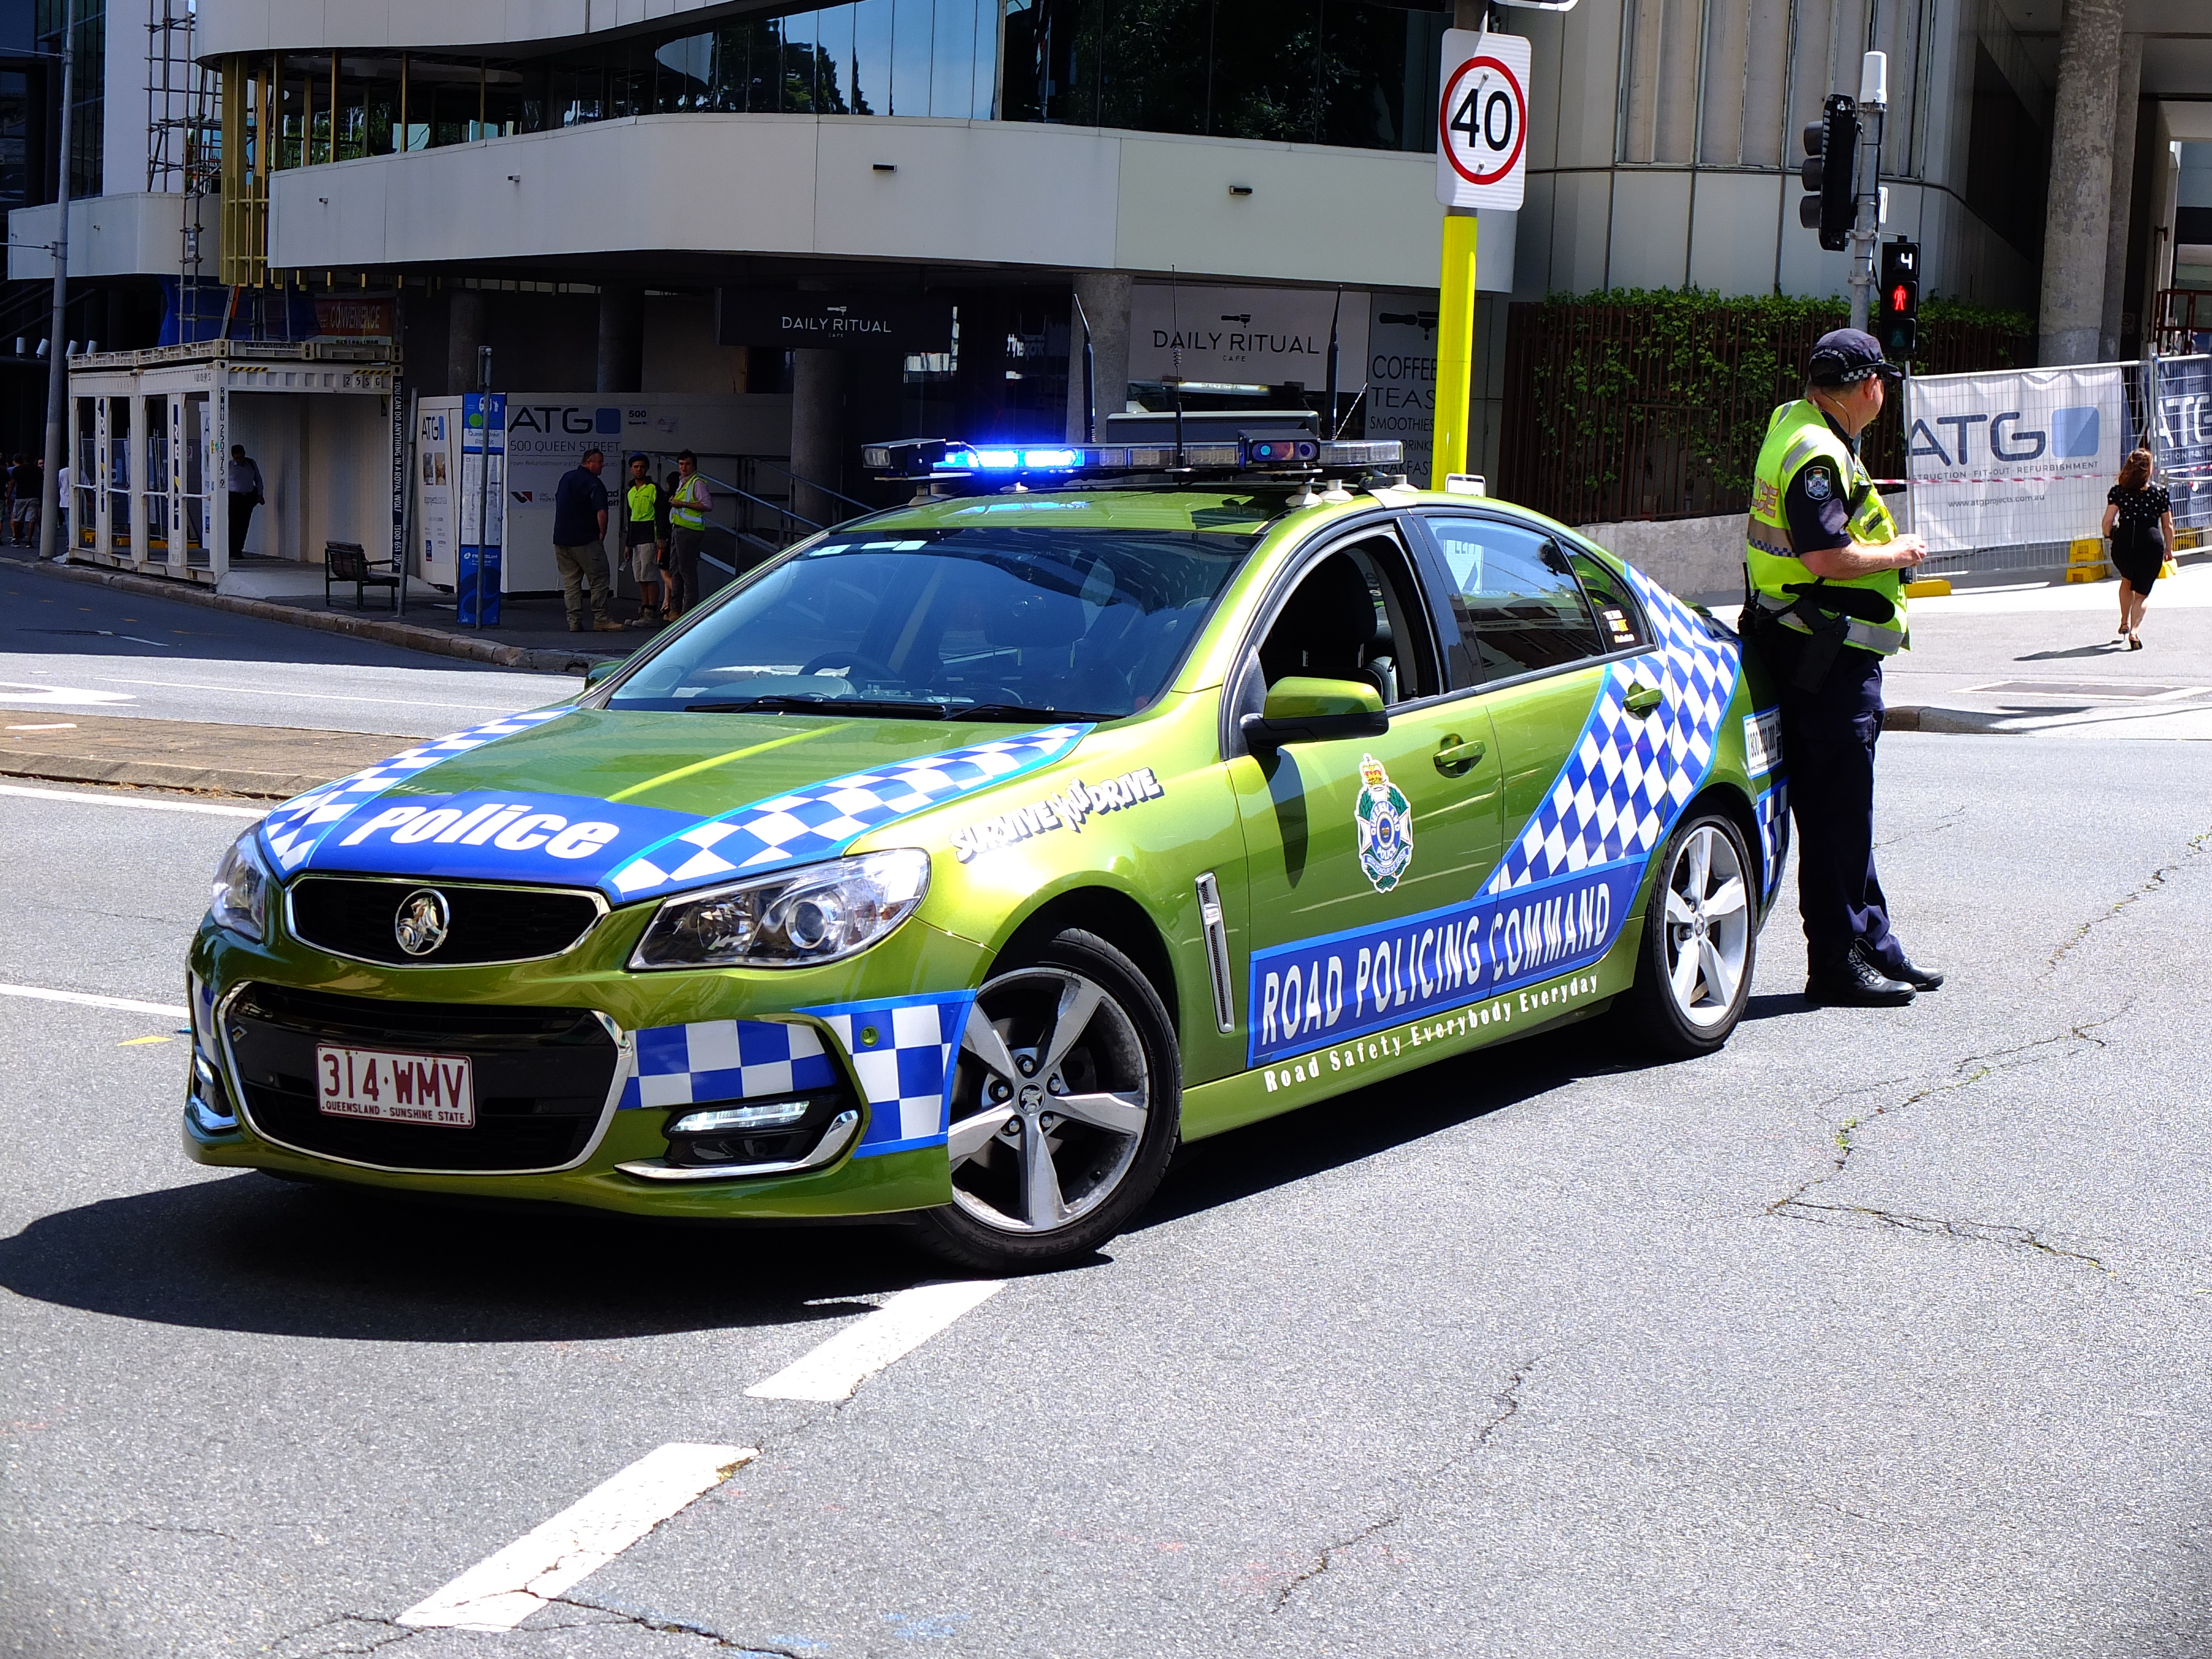 Queensland police car and officer